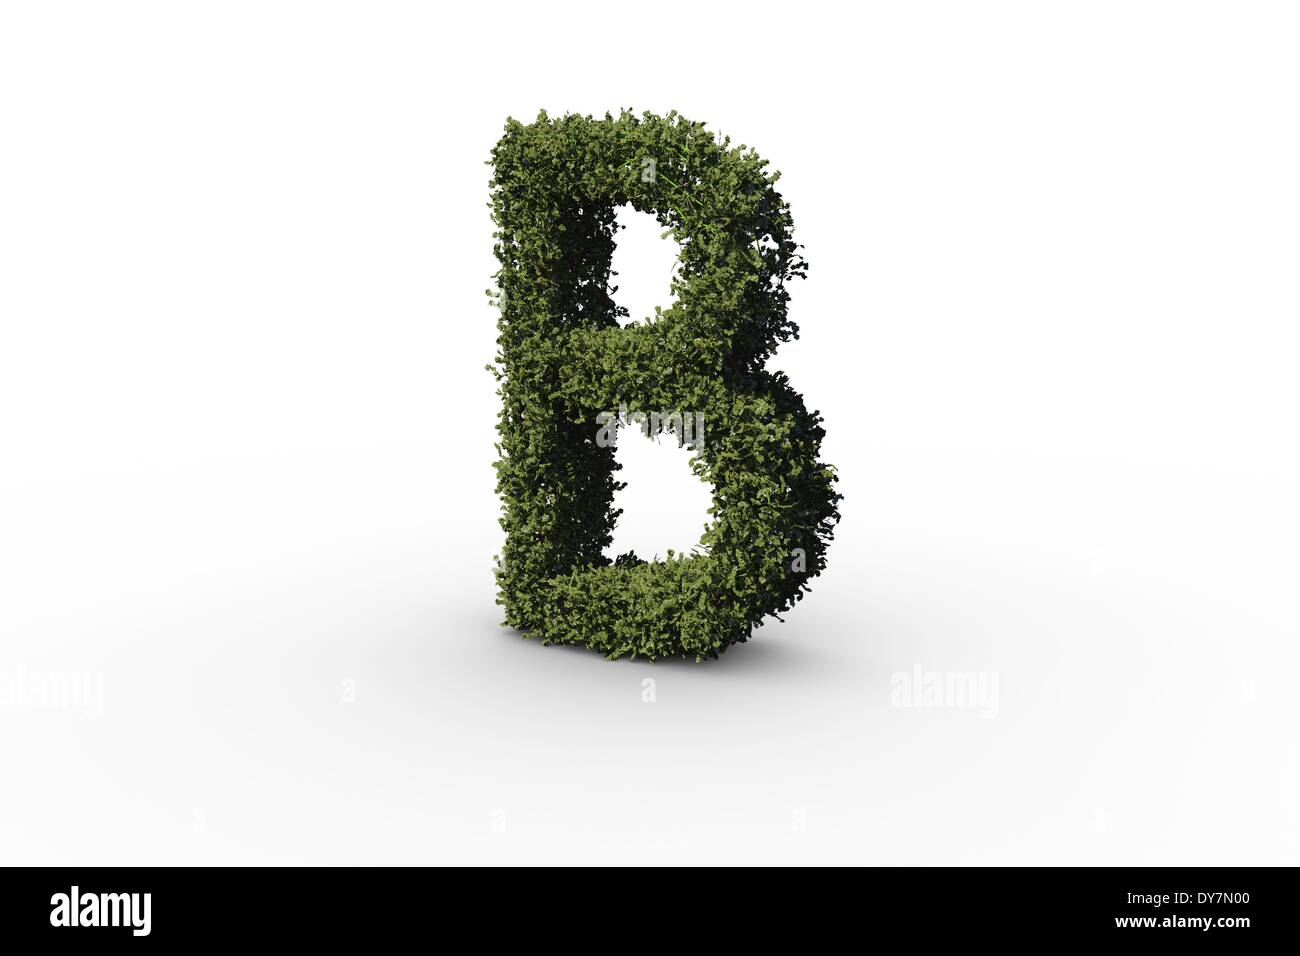 Capital letter b made of leaves Stock Photo